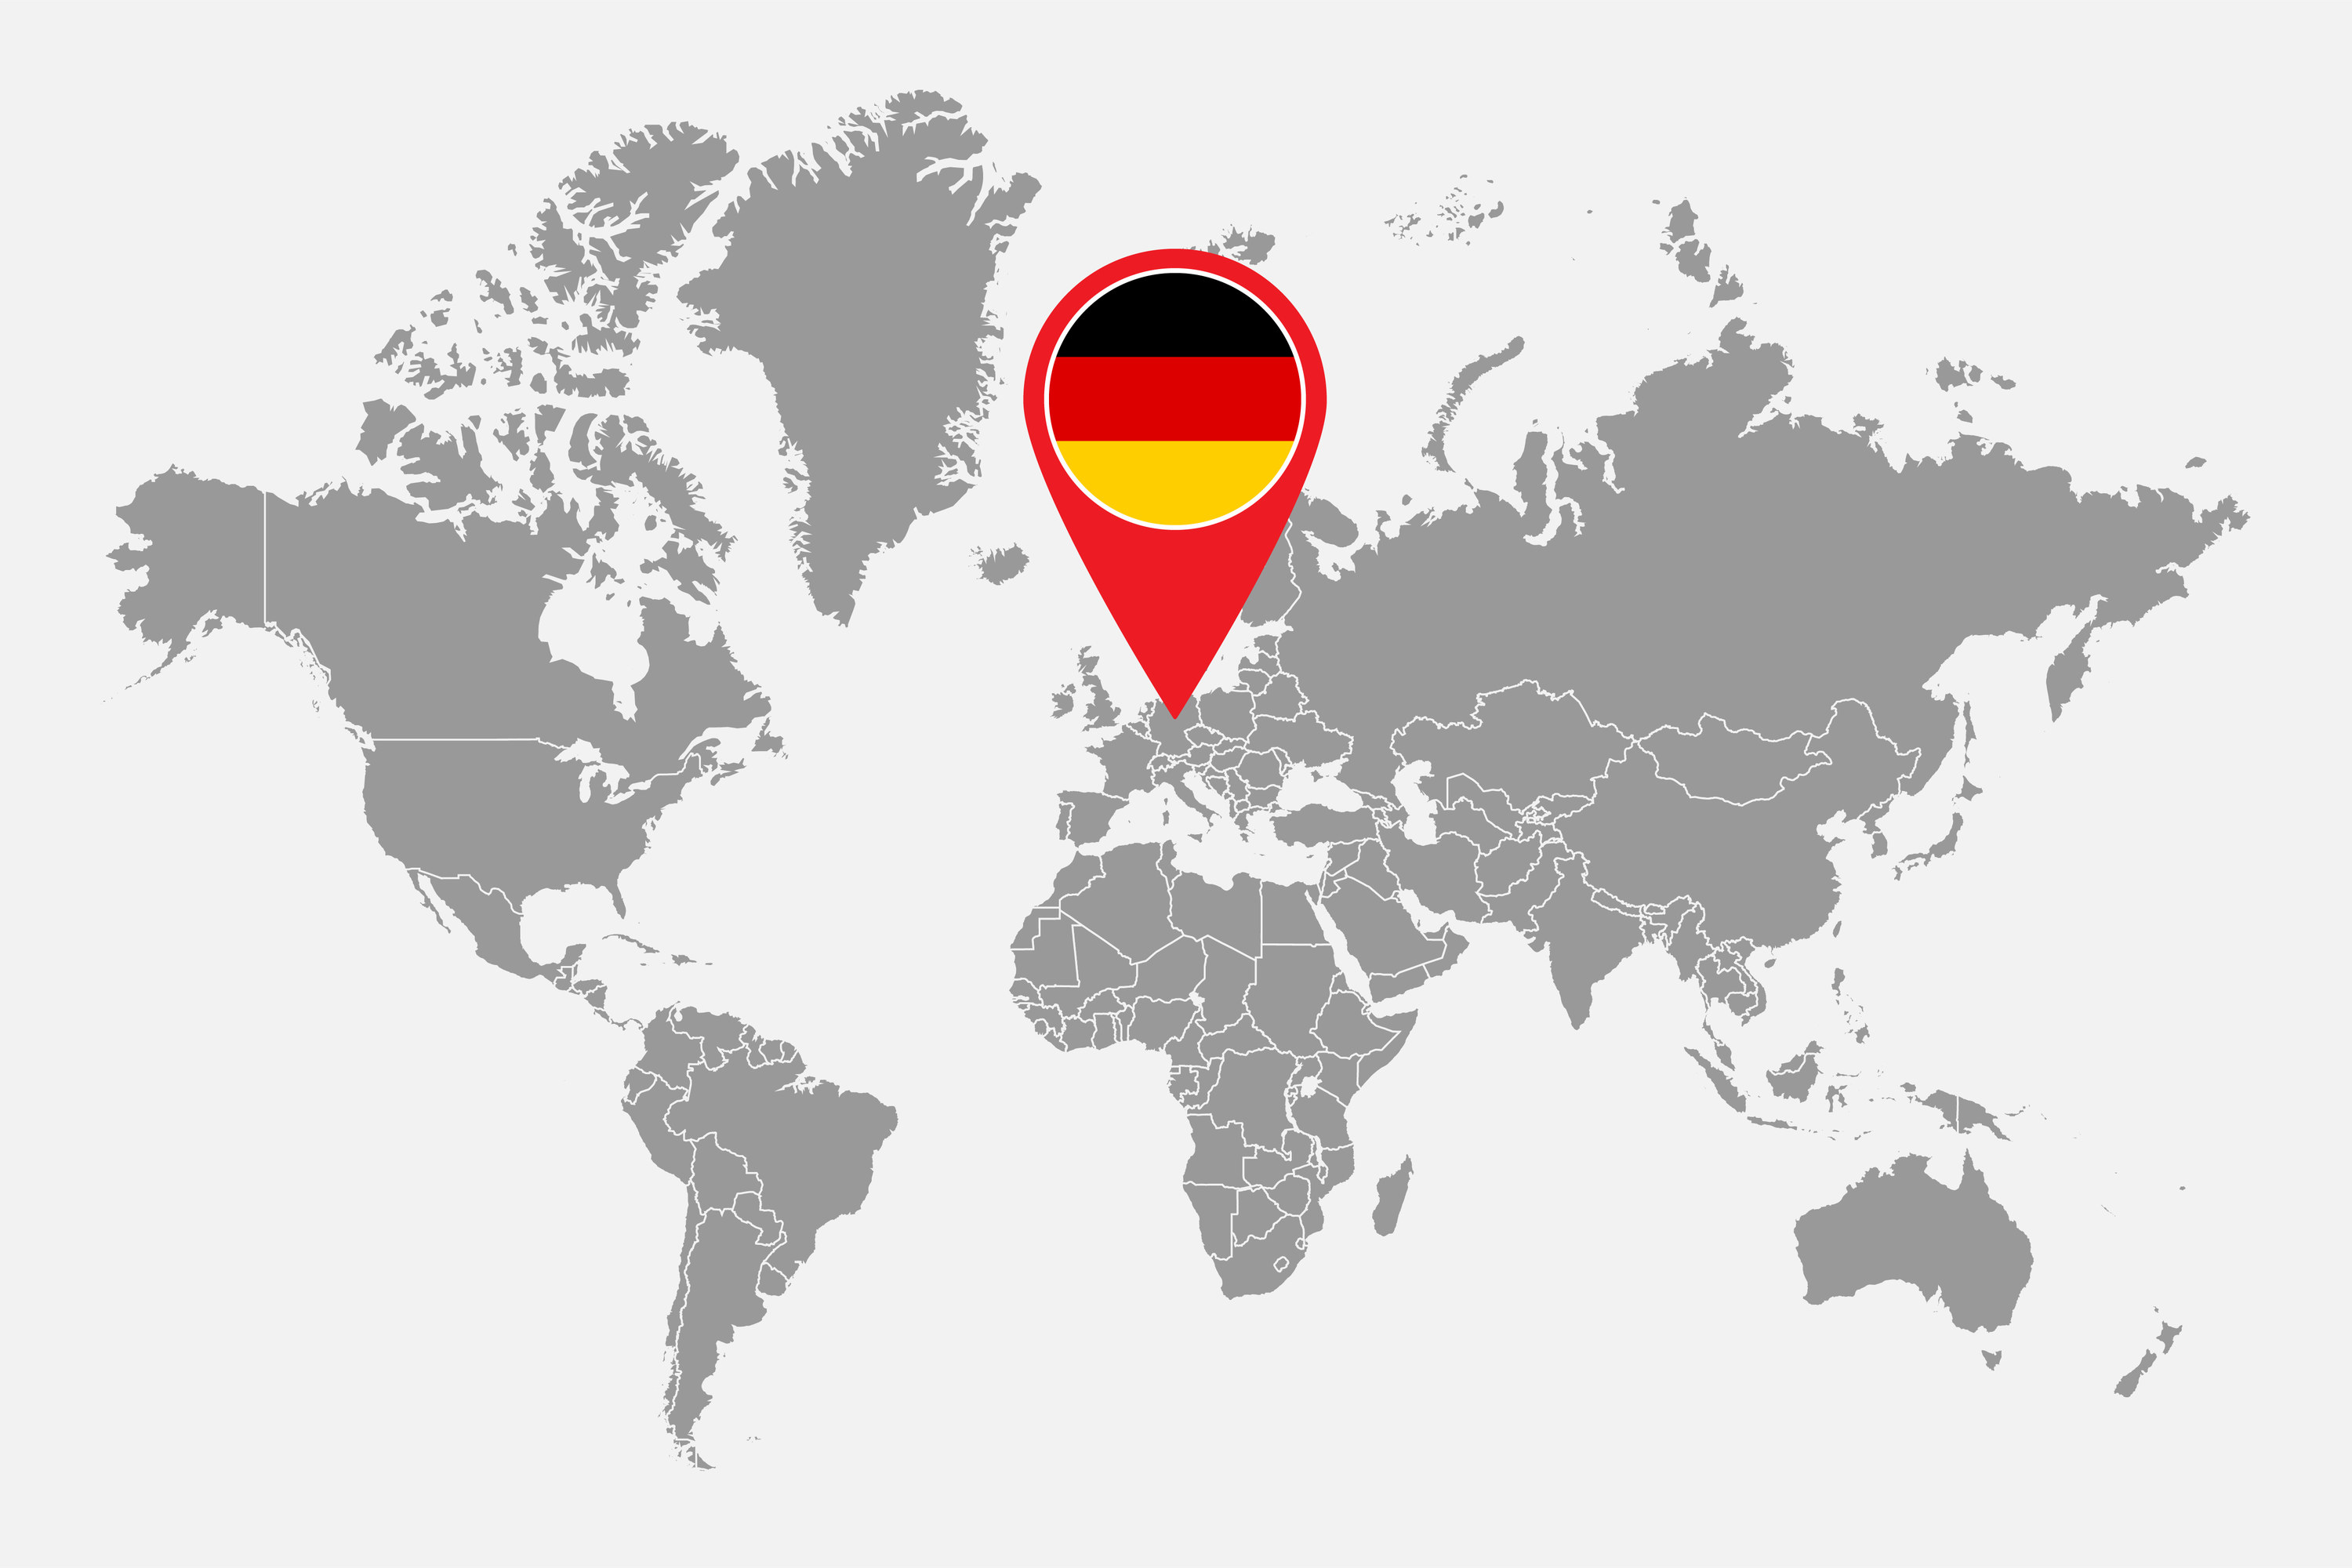 A world map with Germany indicated